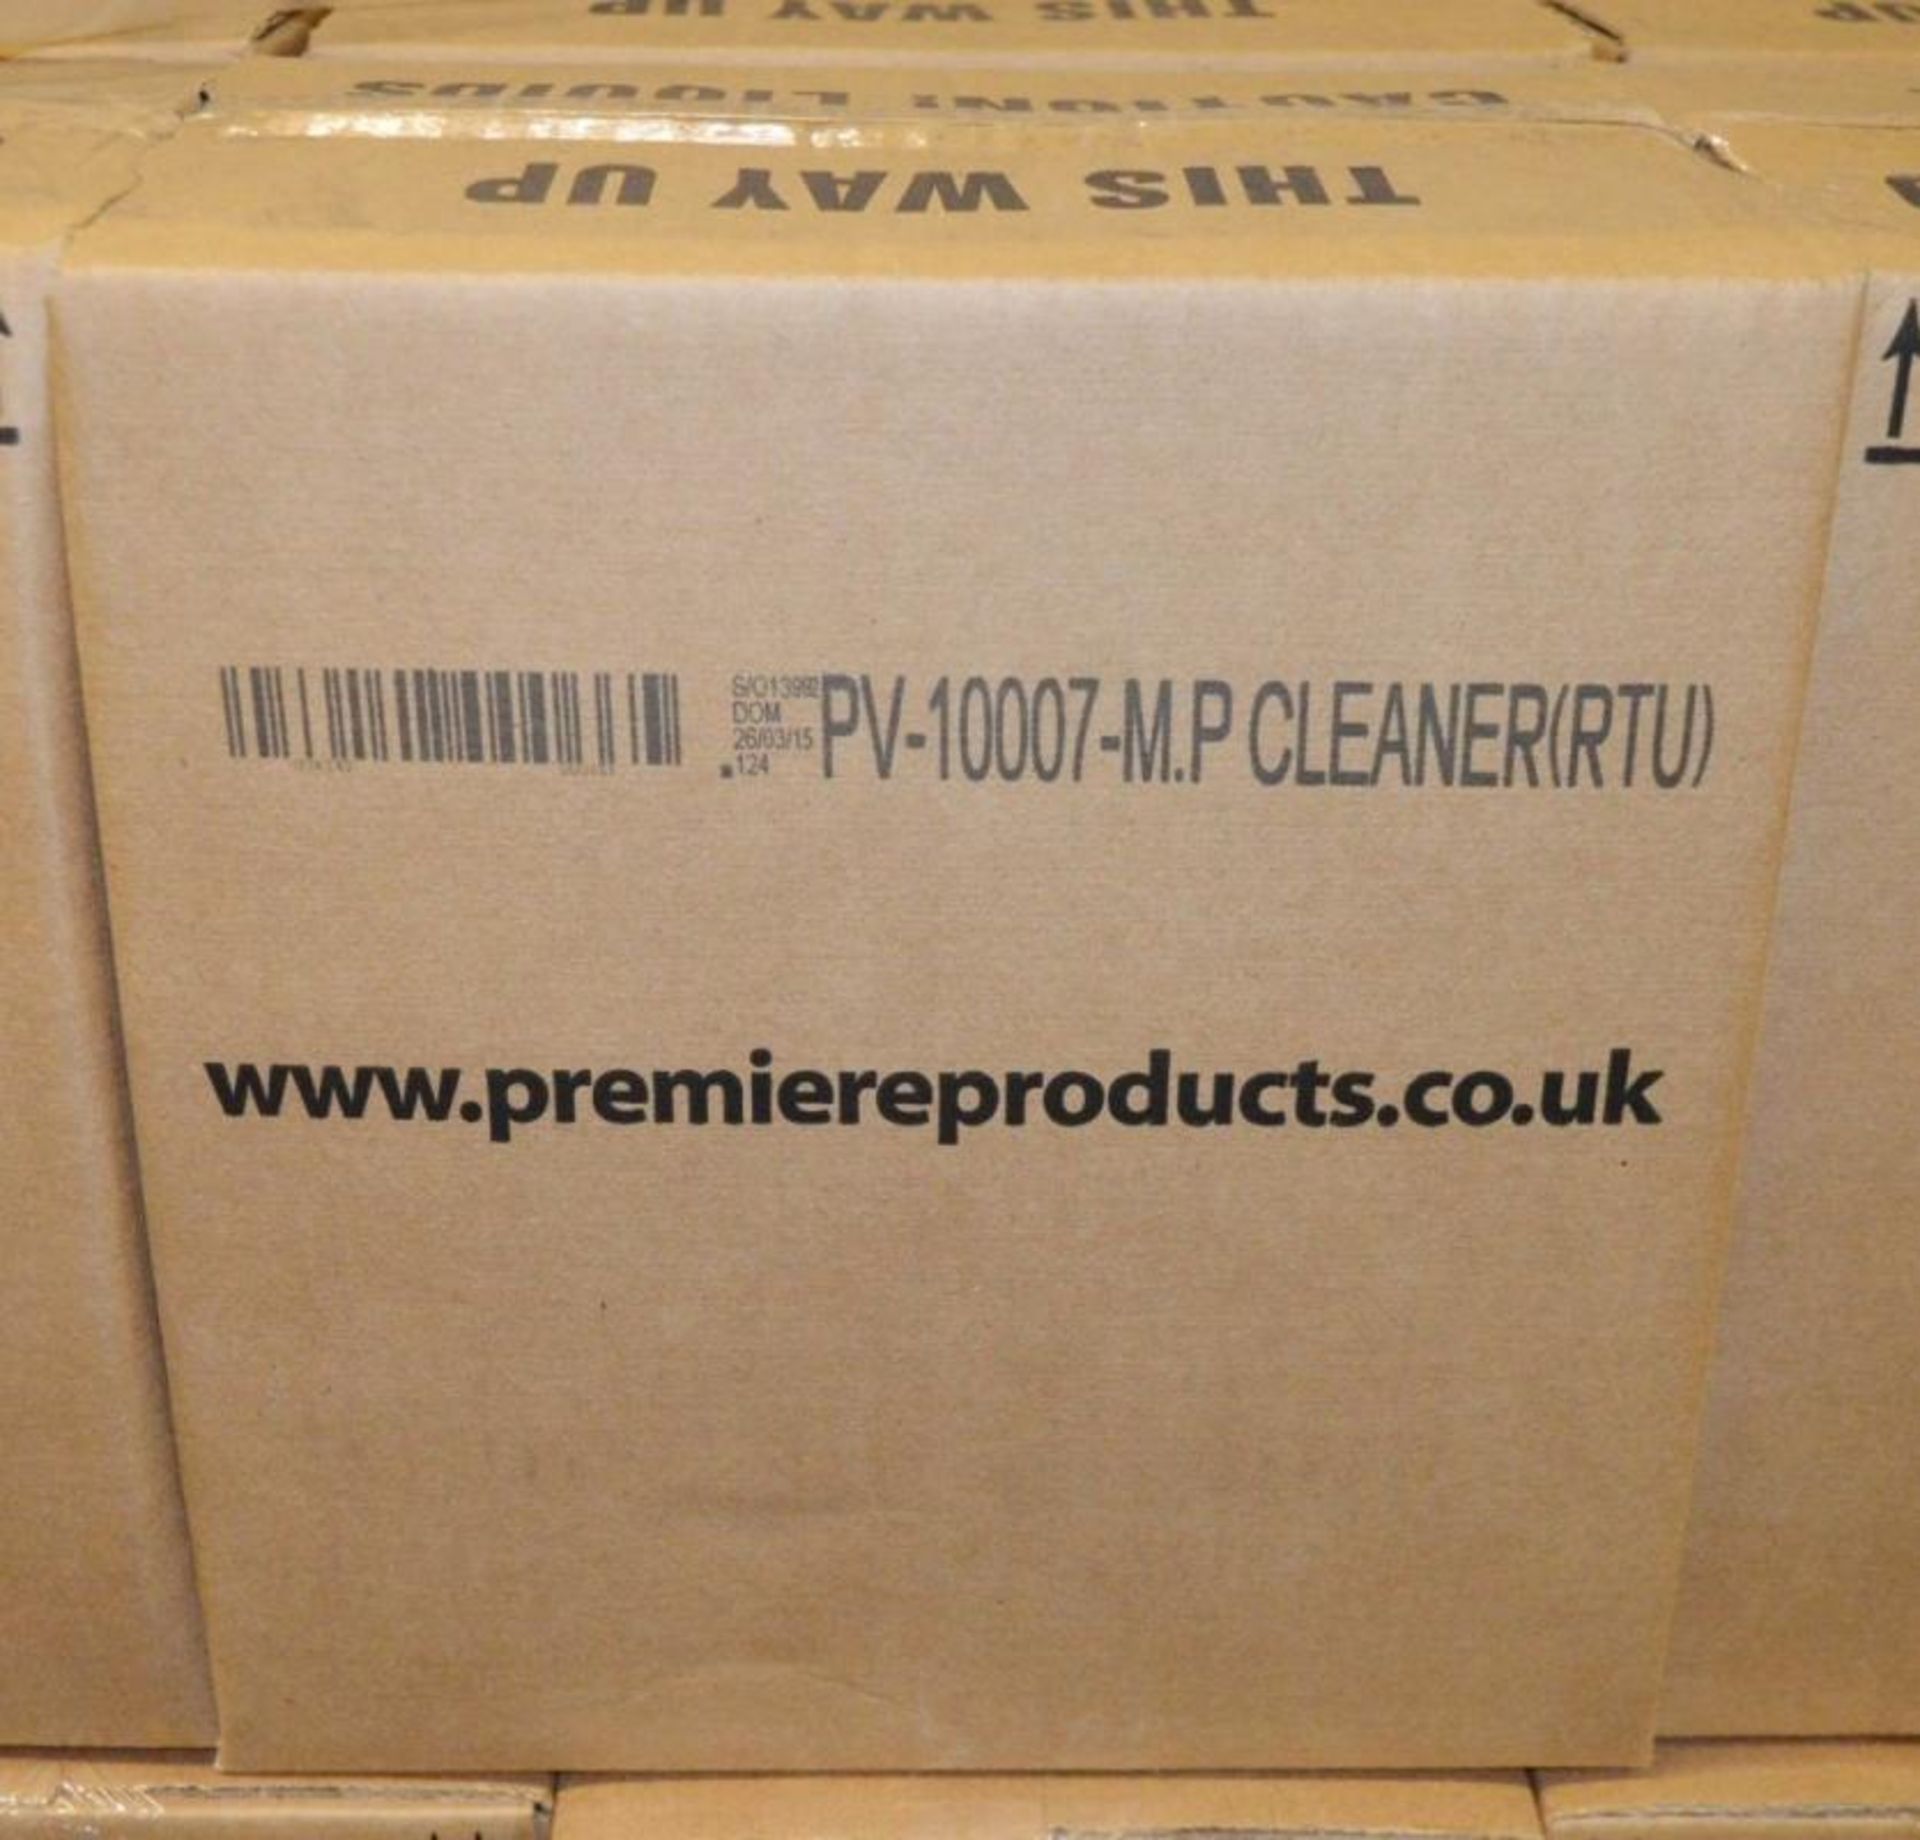 2 x Pro Value Multipurpose Cleaner - A Ready To Use Pine Scented, Non Abrasive Cleaner - Includes - Image 2 of 3